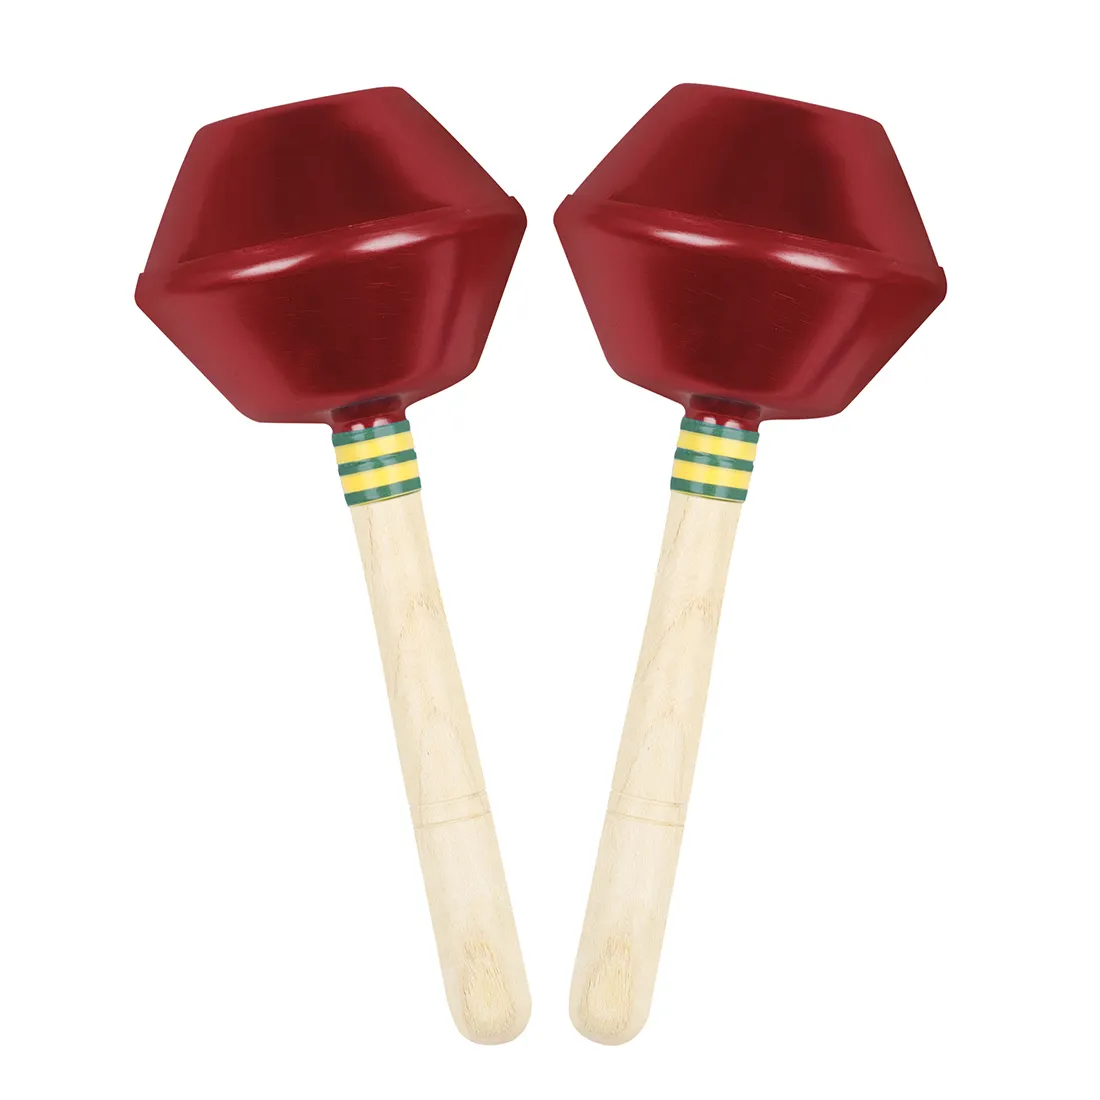 The Latest Metal Colorful Children Is Early Education Puzzle Percussion Instrument Maracas Rattle Instrument Sand Hammer